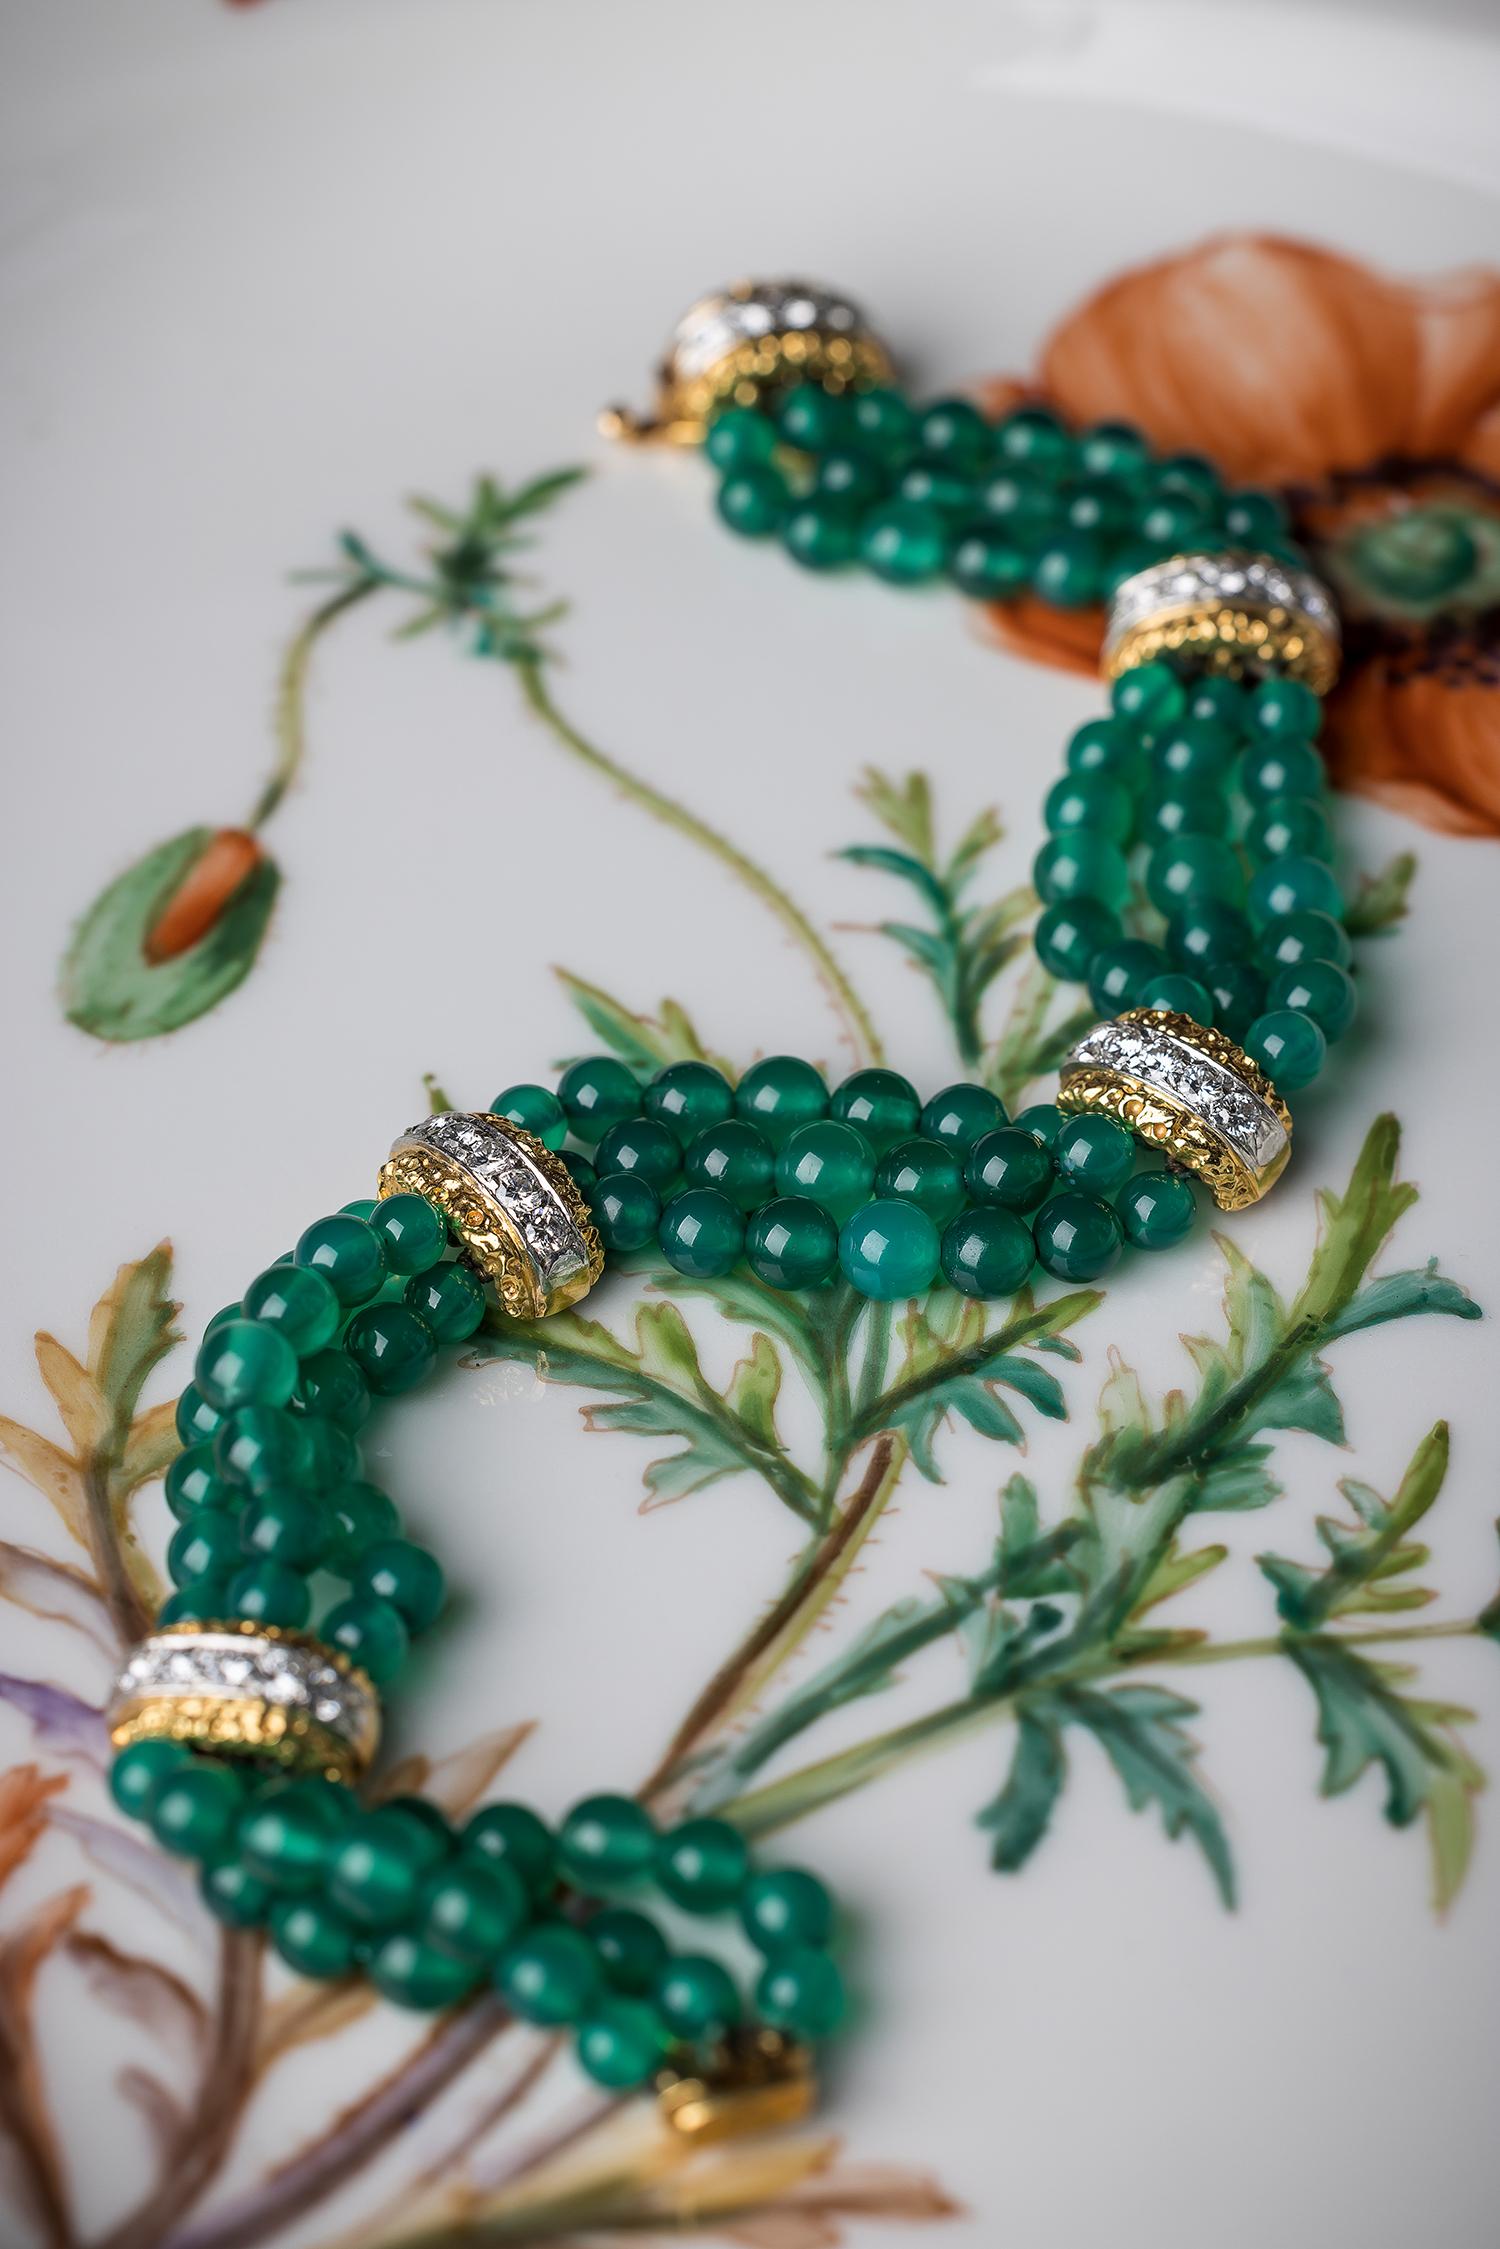 Pure elegance, day and night – Van Cleef & Arpels, 1970s, bracelet made in 18K yellow gold formed by three rows of chrysoprase beads with five domed spacers in yellow gold and platinum set each with a row of 5 brilliant-cut diamonds, one used as a